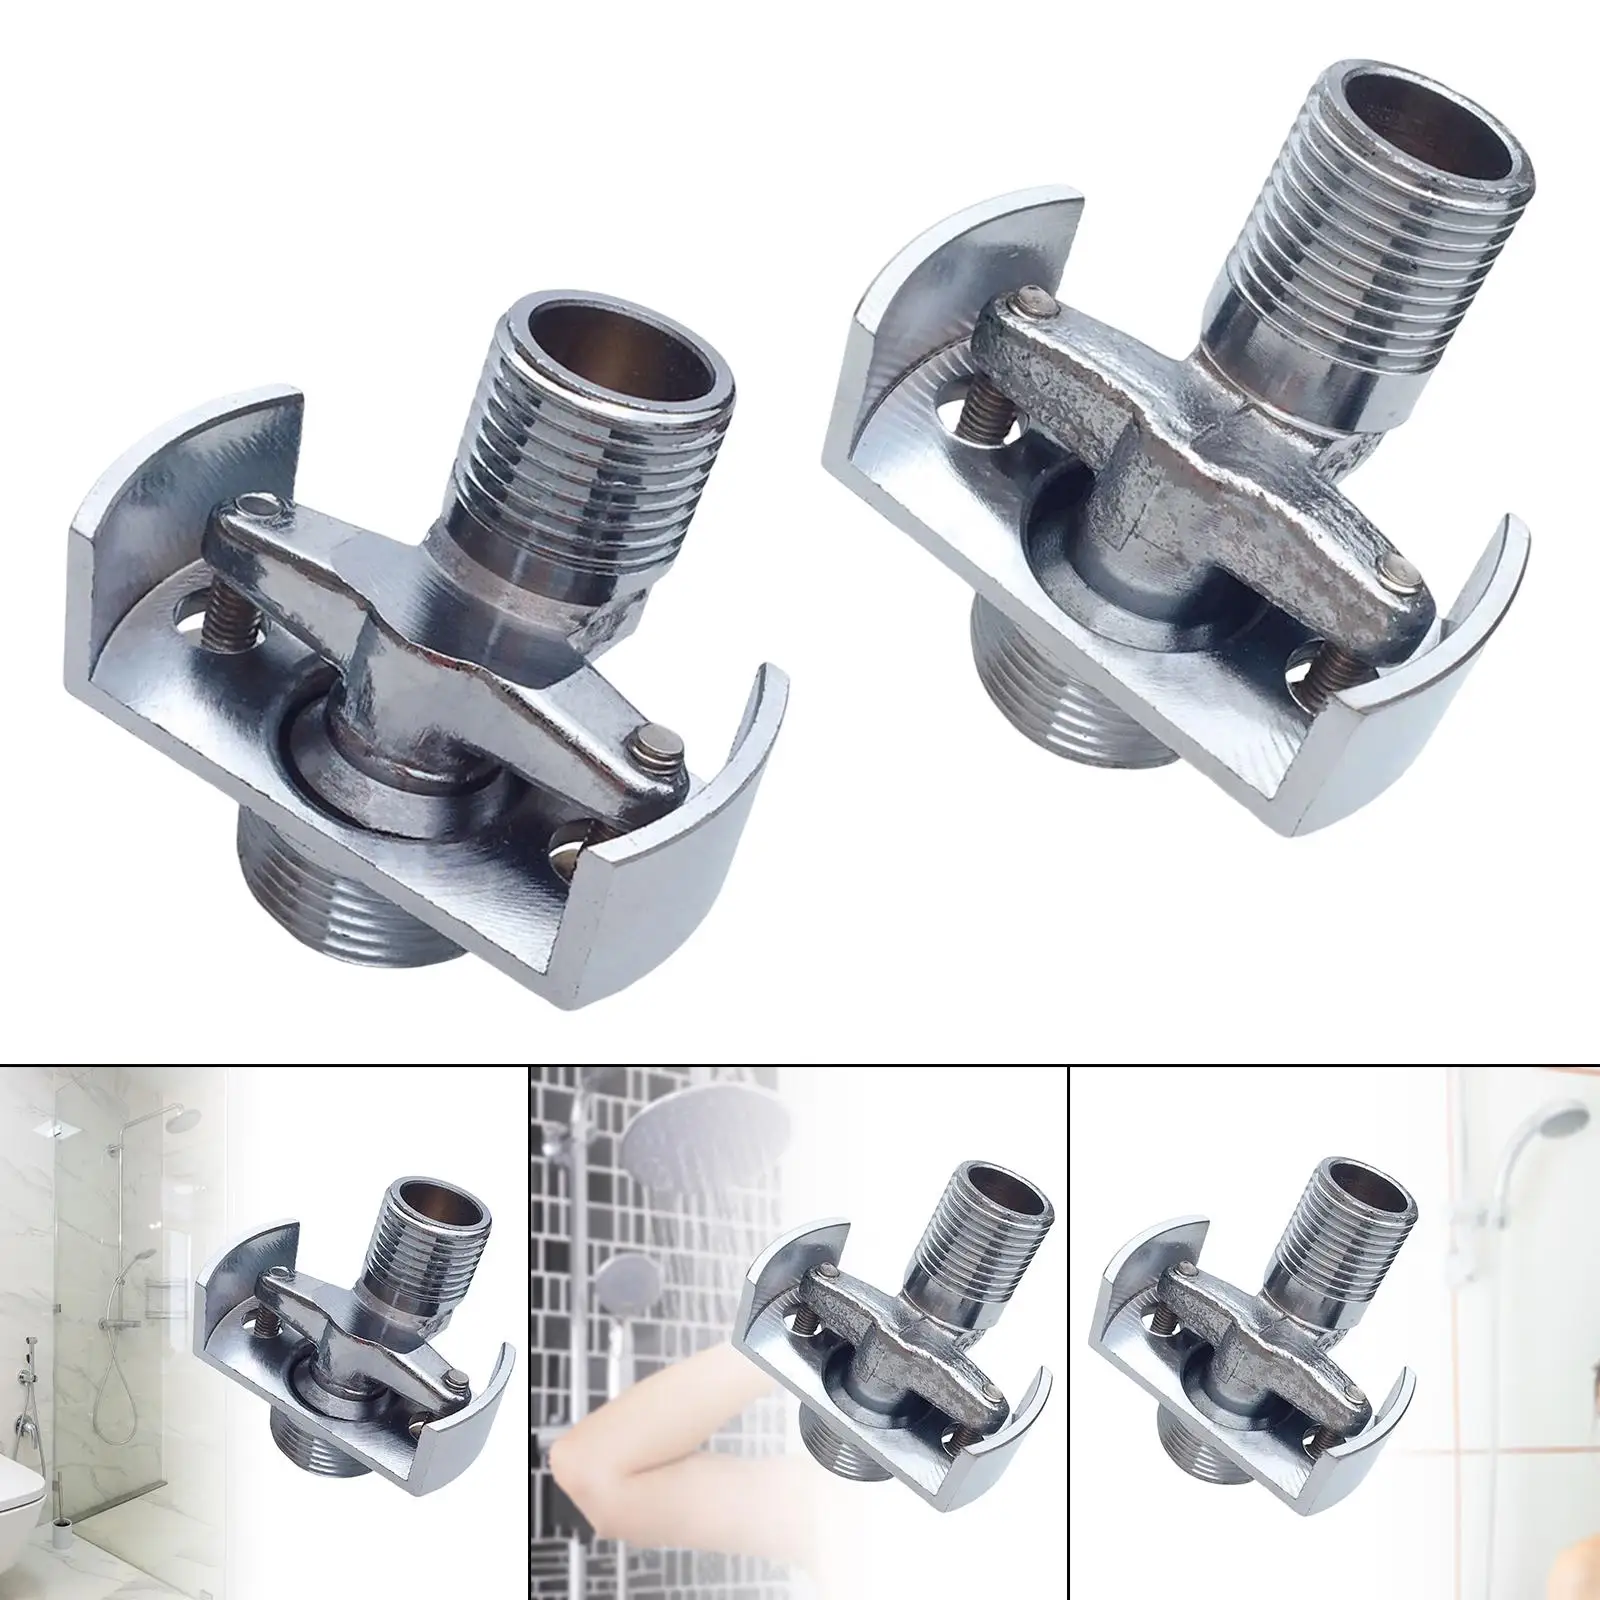 Shower Faucet Adapter Adjustable Angle Wall Mounted Copper for Bathroom Household